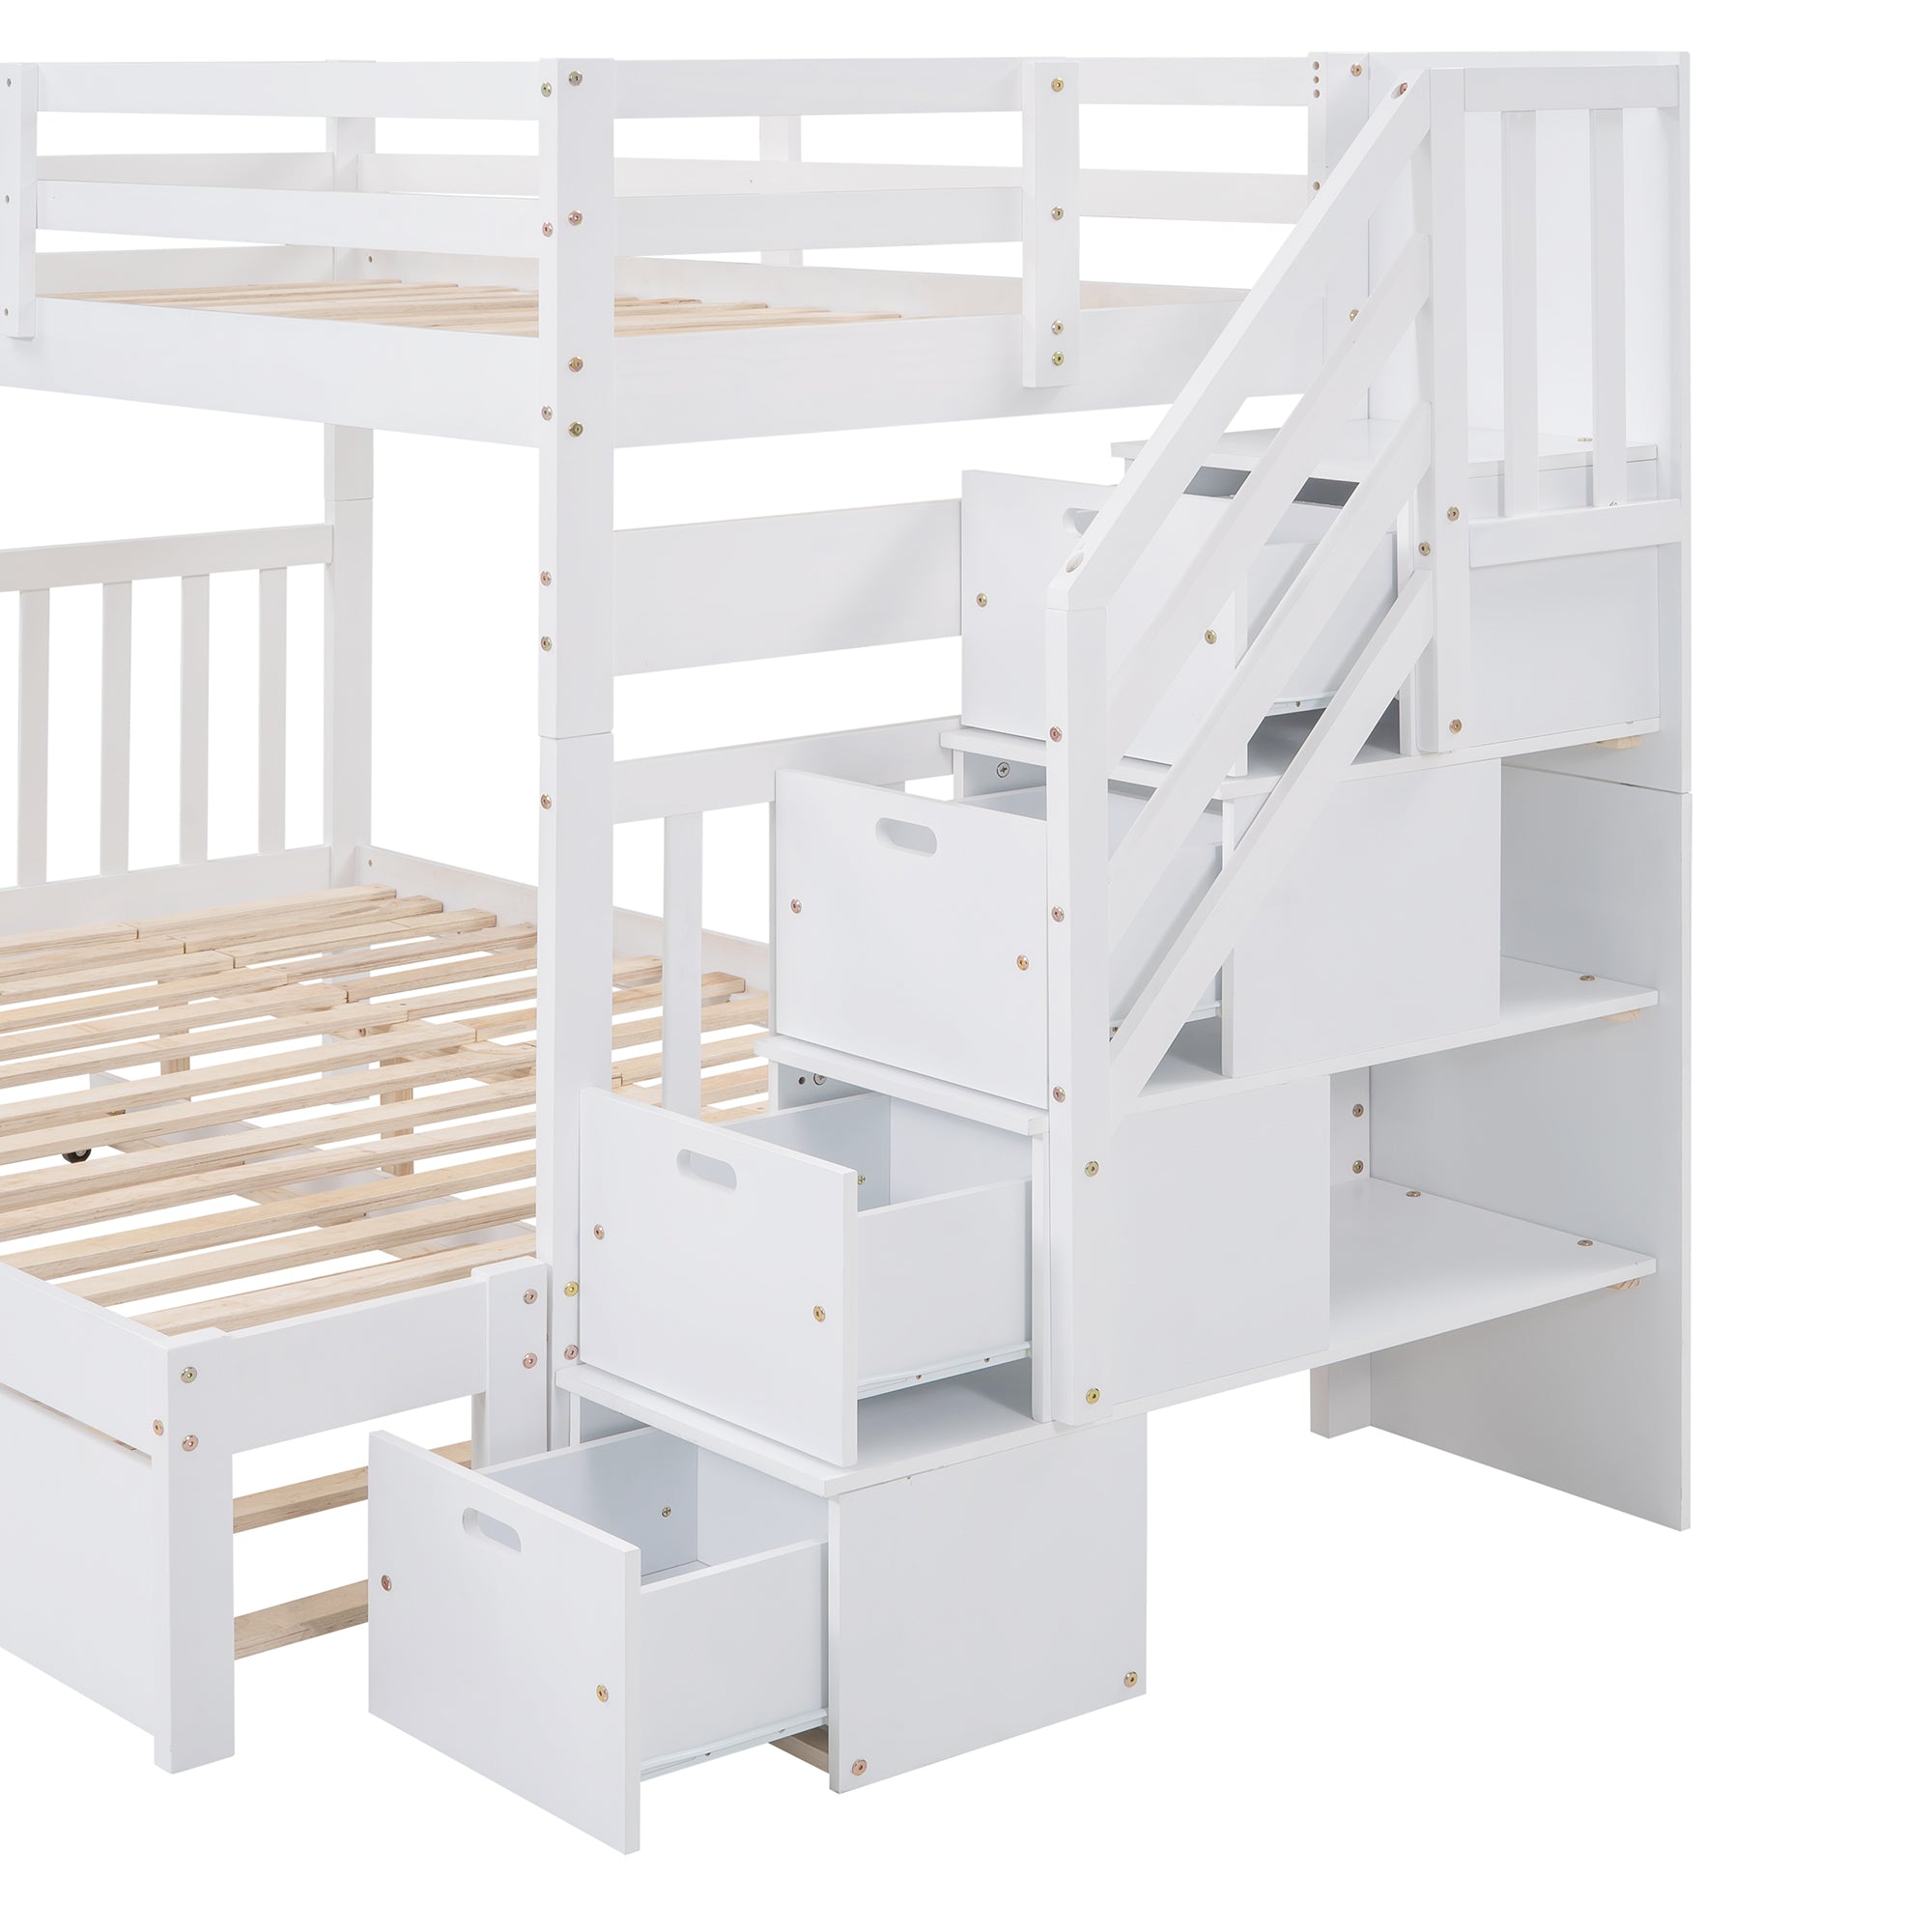 Bellemave® Twin over Twin/Full Bunk Bed with Trundle Bellemave®